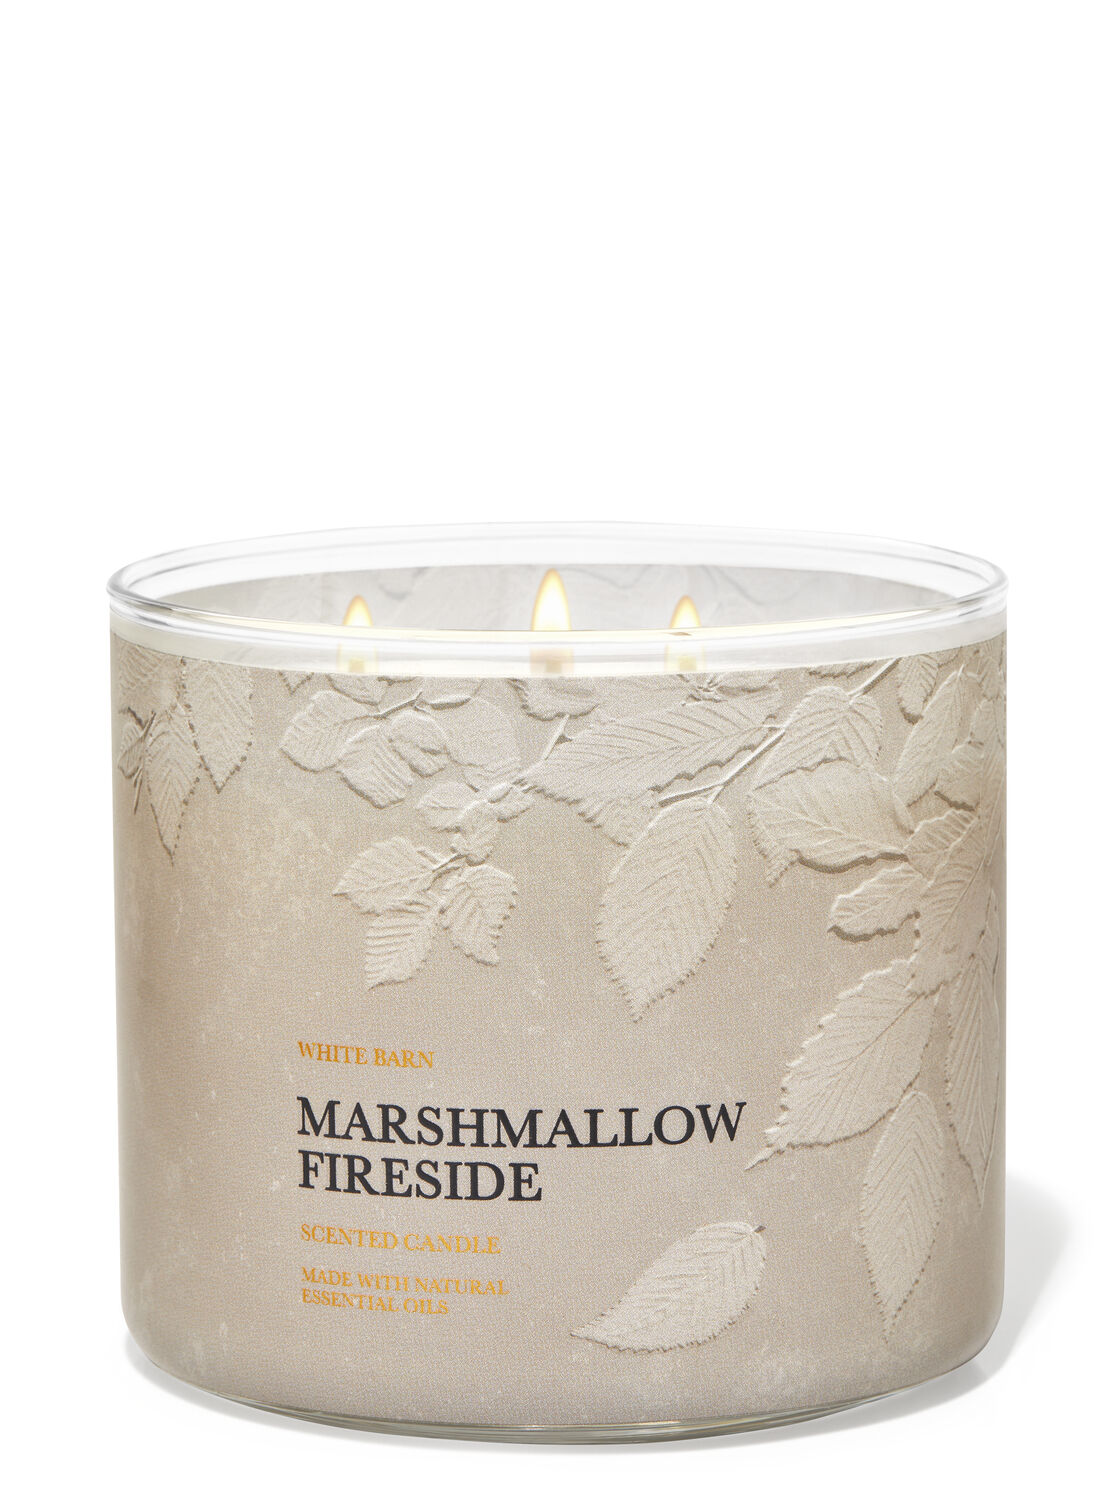 BATH & BODY WORKS MARSHMALLOW FIRESIDE 3 WICK CANDLE NEW FREE SHIPPING 